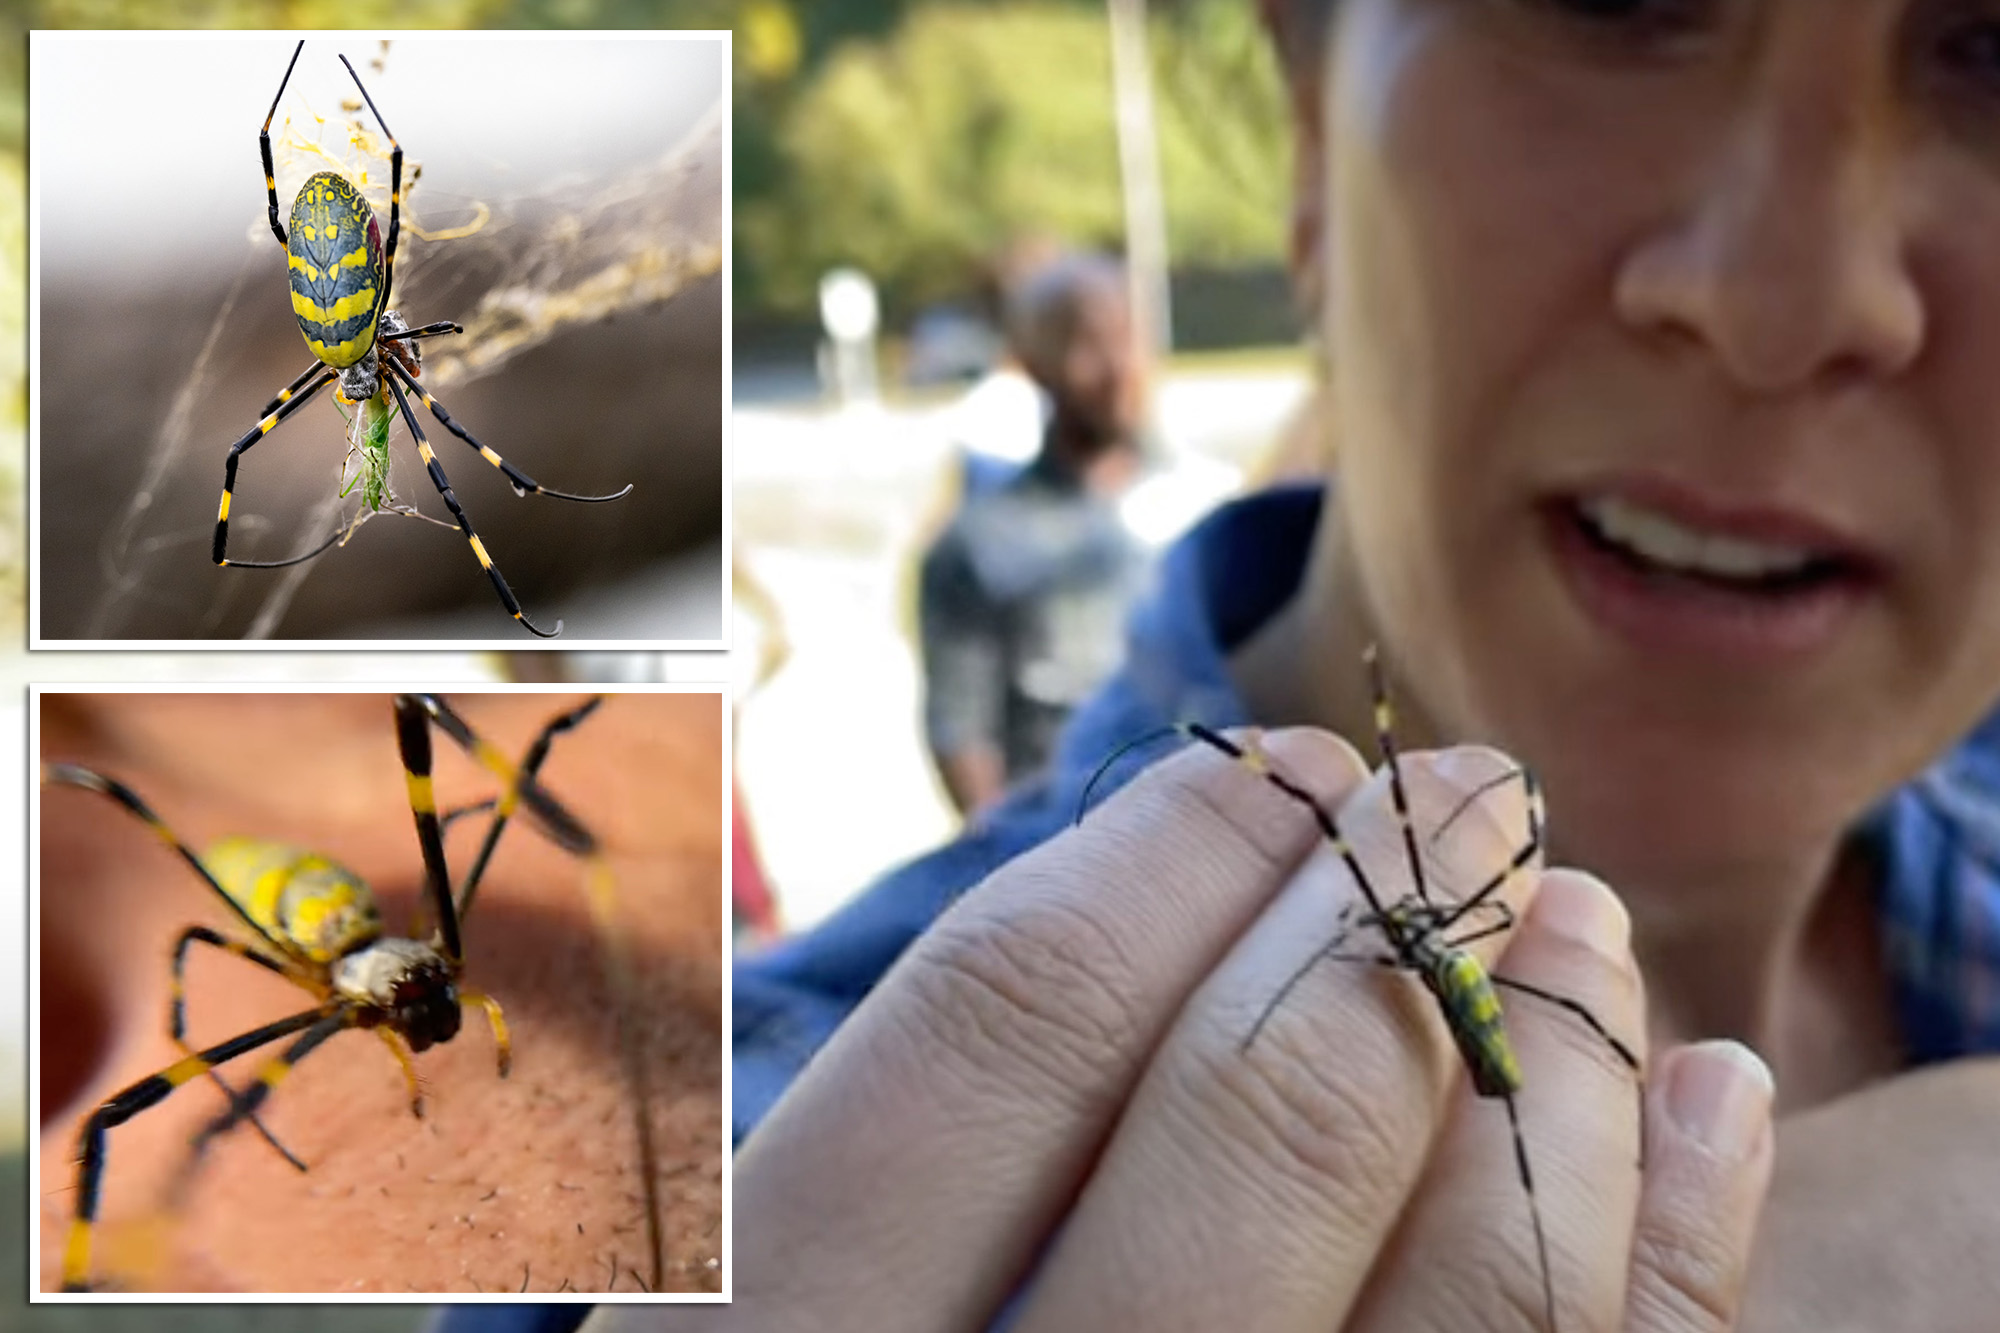 Invasive spiders the size of a human hand that can float in the air are expected to land in NYC this summer